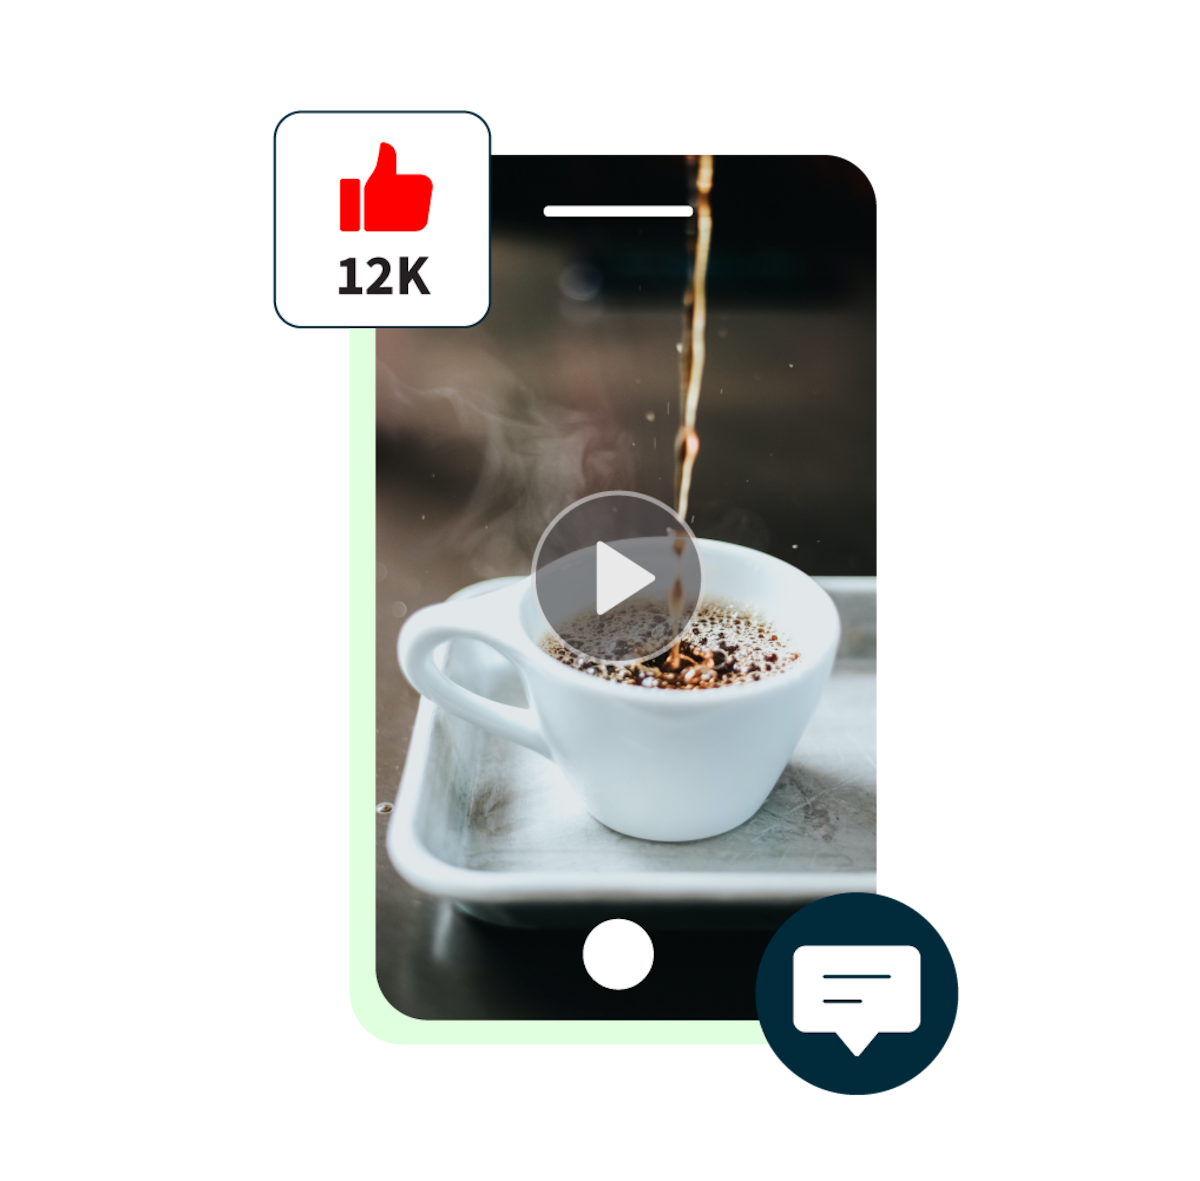 youtube shorts video thumbnail of a coffee shot being poured, along with 12,000 likes pop-up